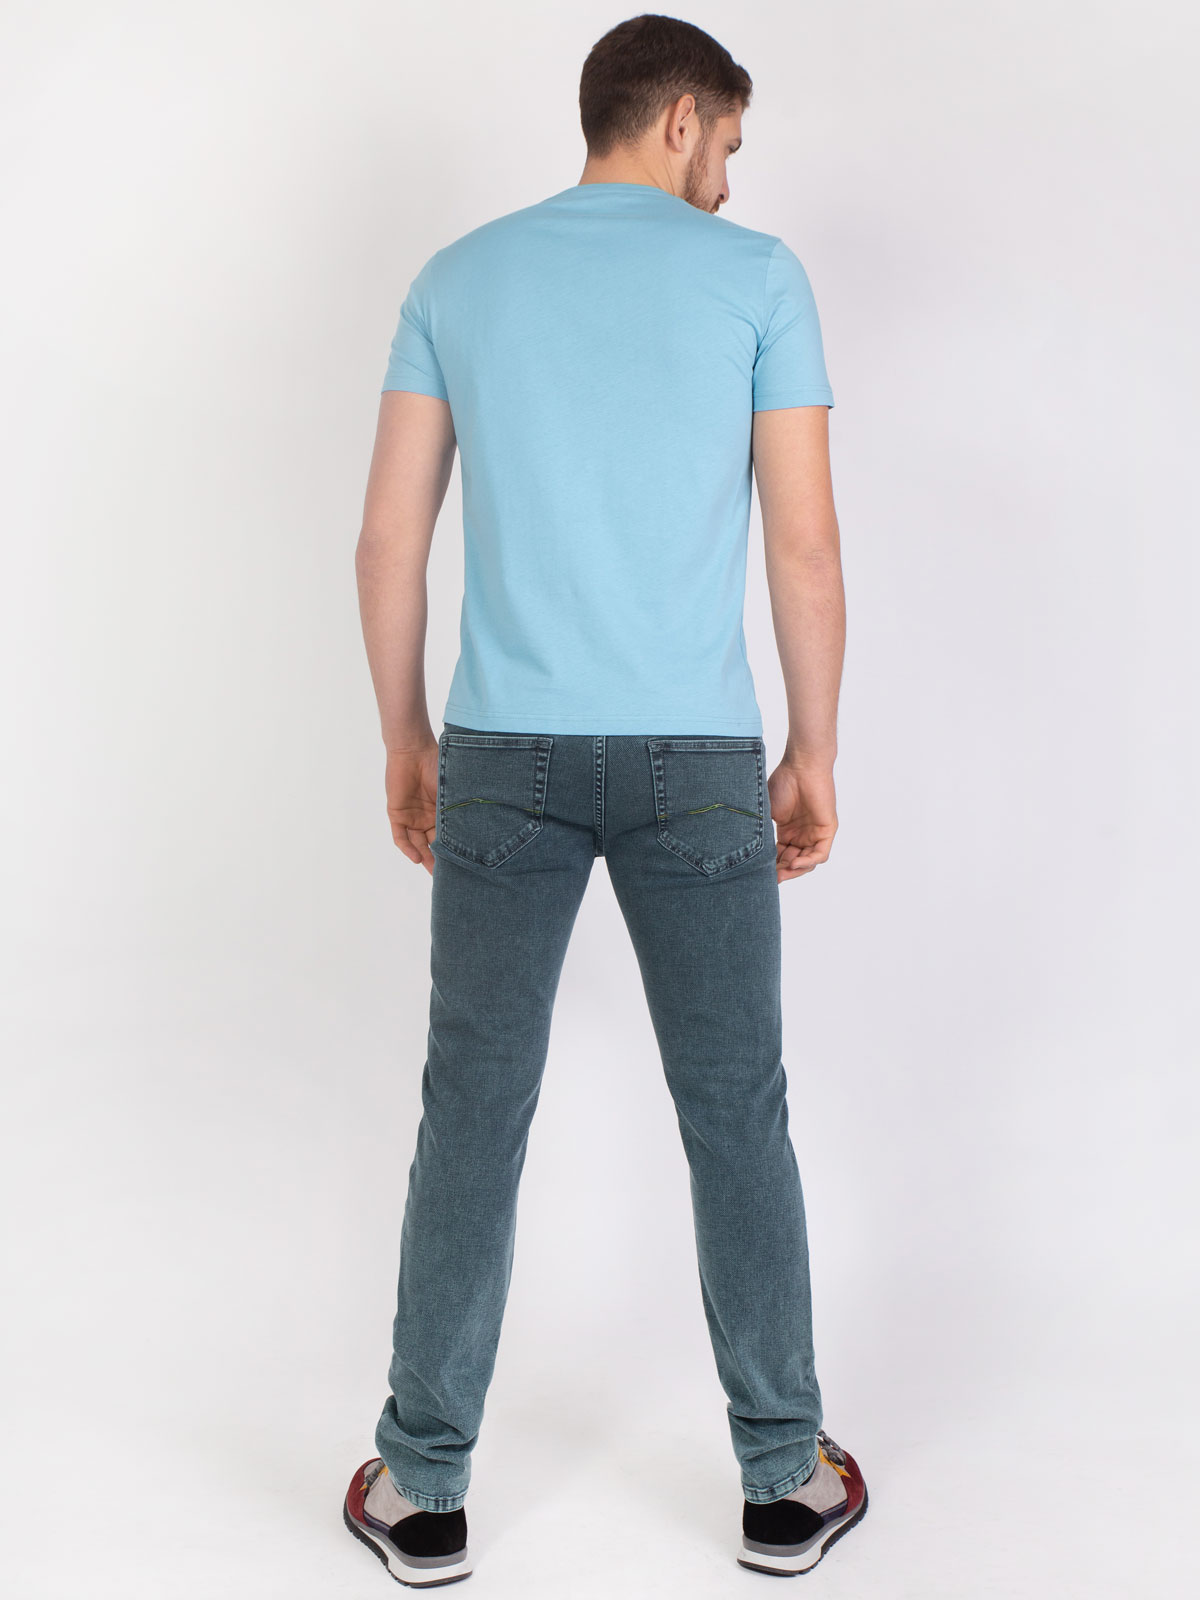 Light blue tshirt with a round patch - 96381 € 11.81 img3